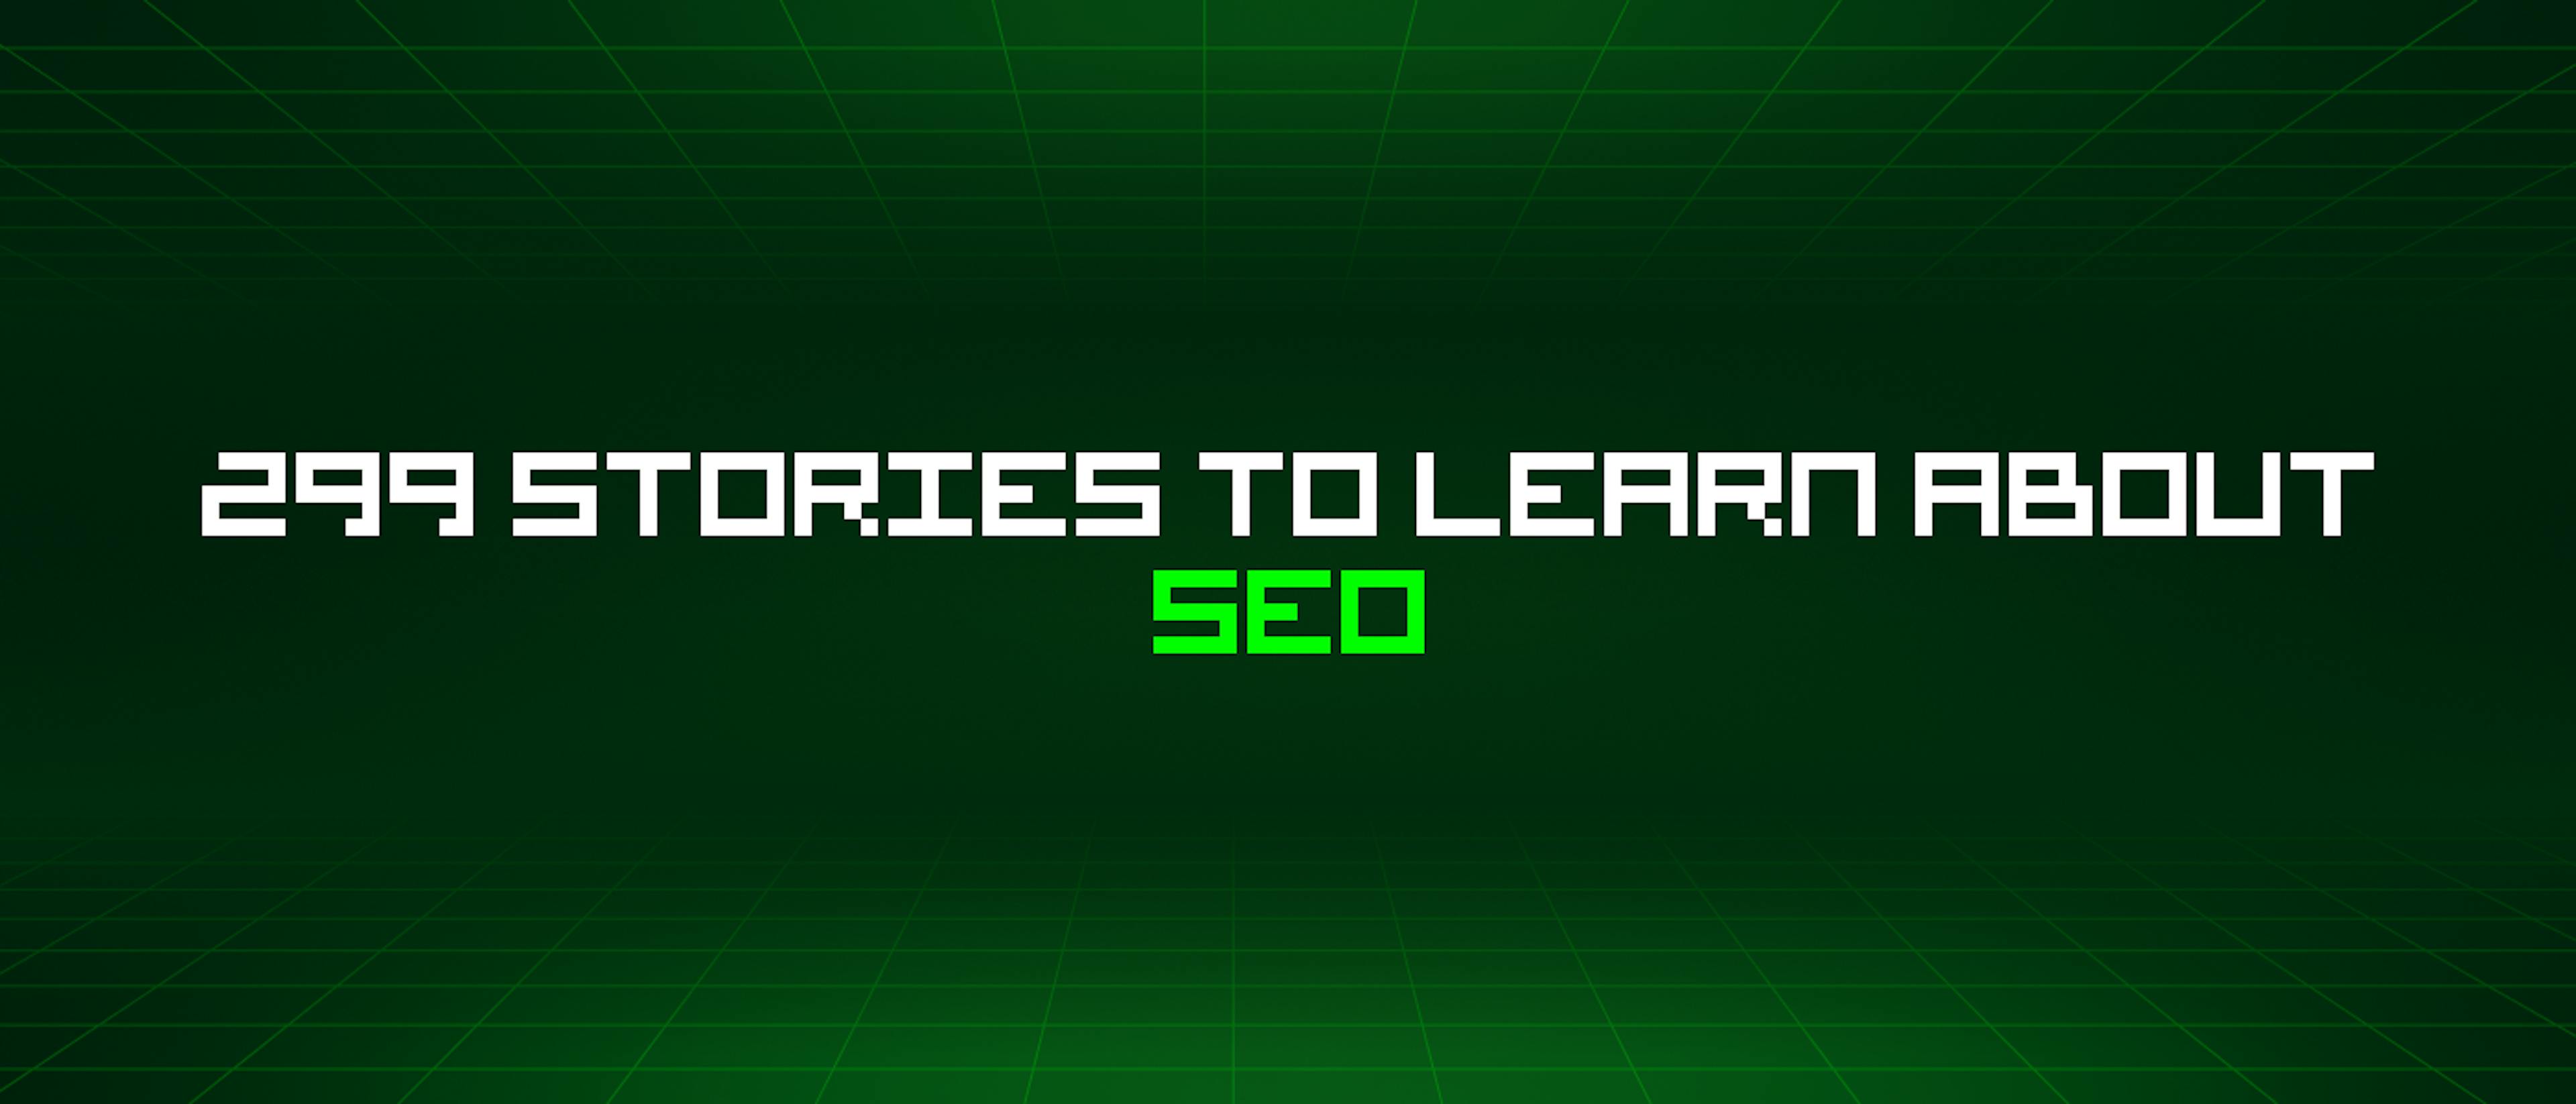 featured image - 299 Stories To Learn About Seo